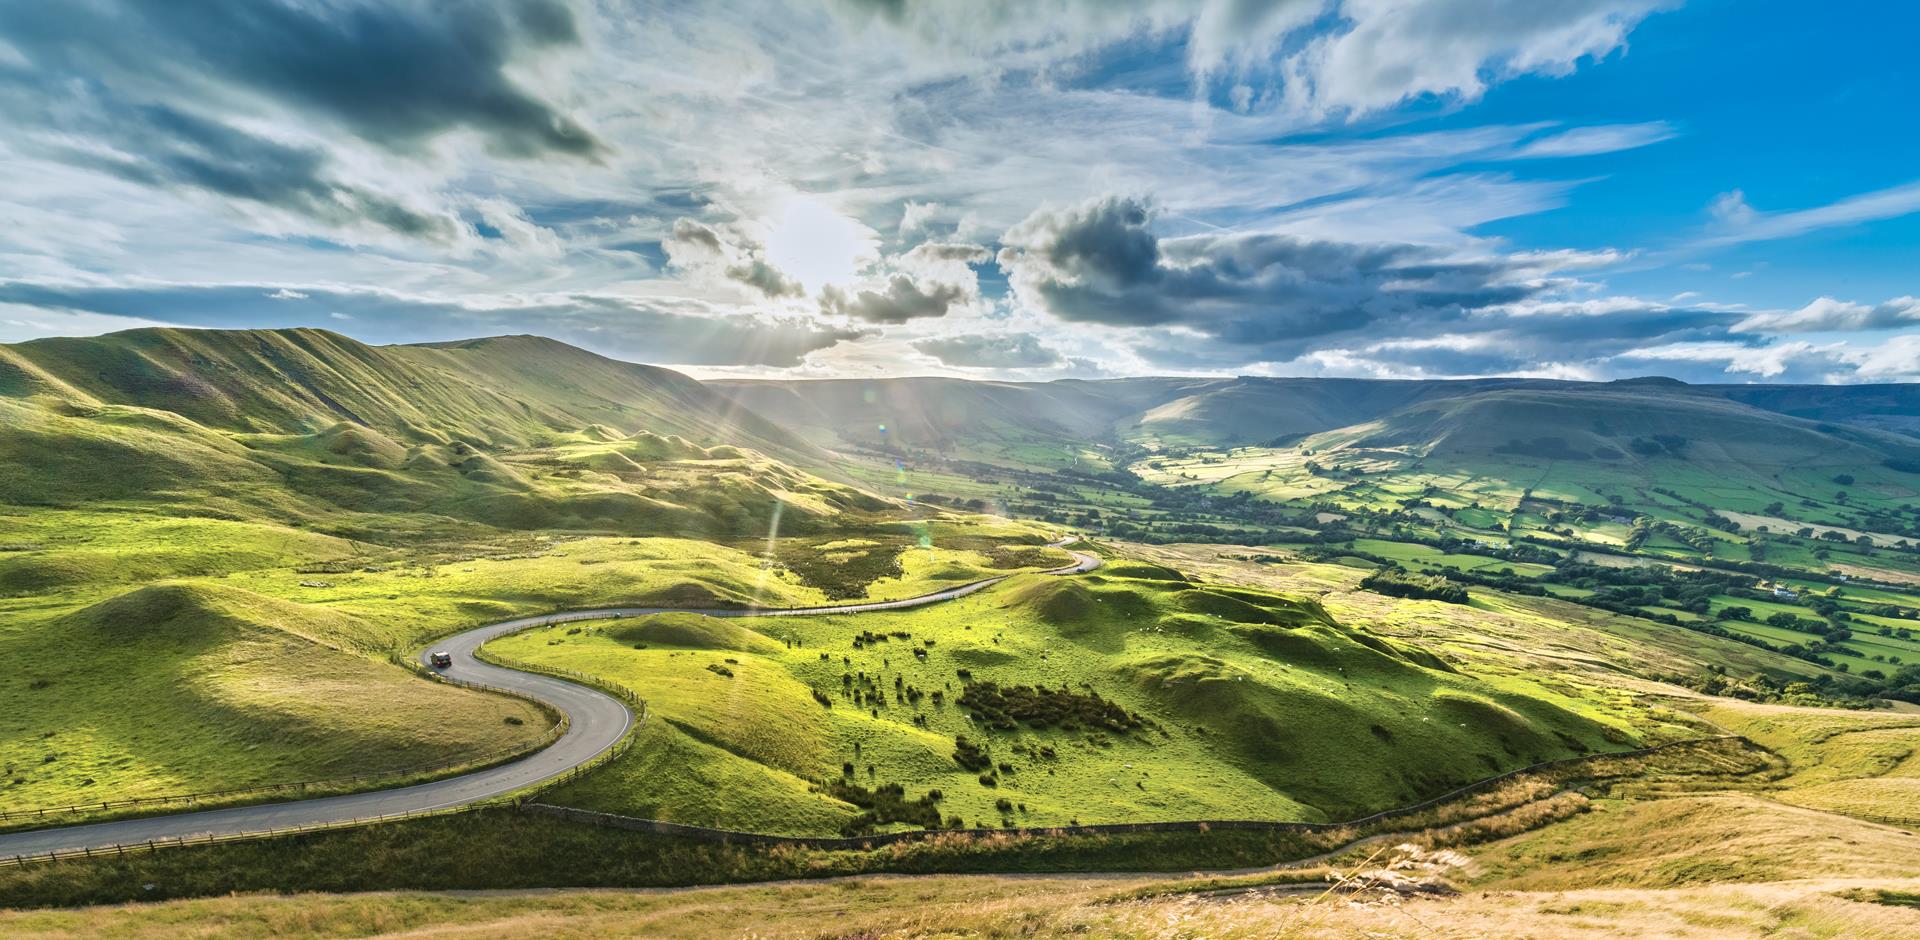 Serpentine Road among green hills of Peak District National Park, England.